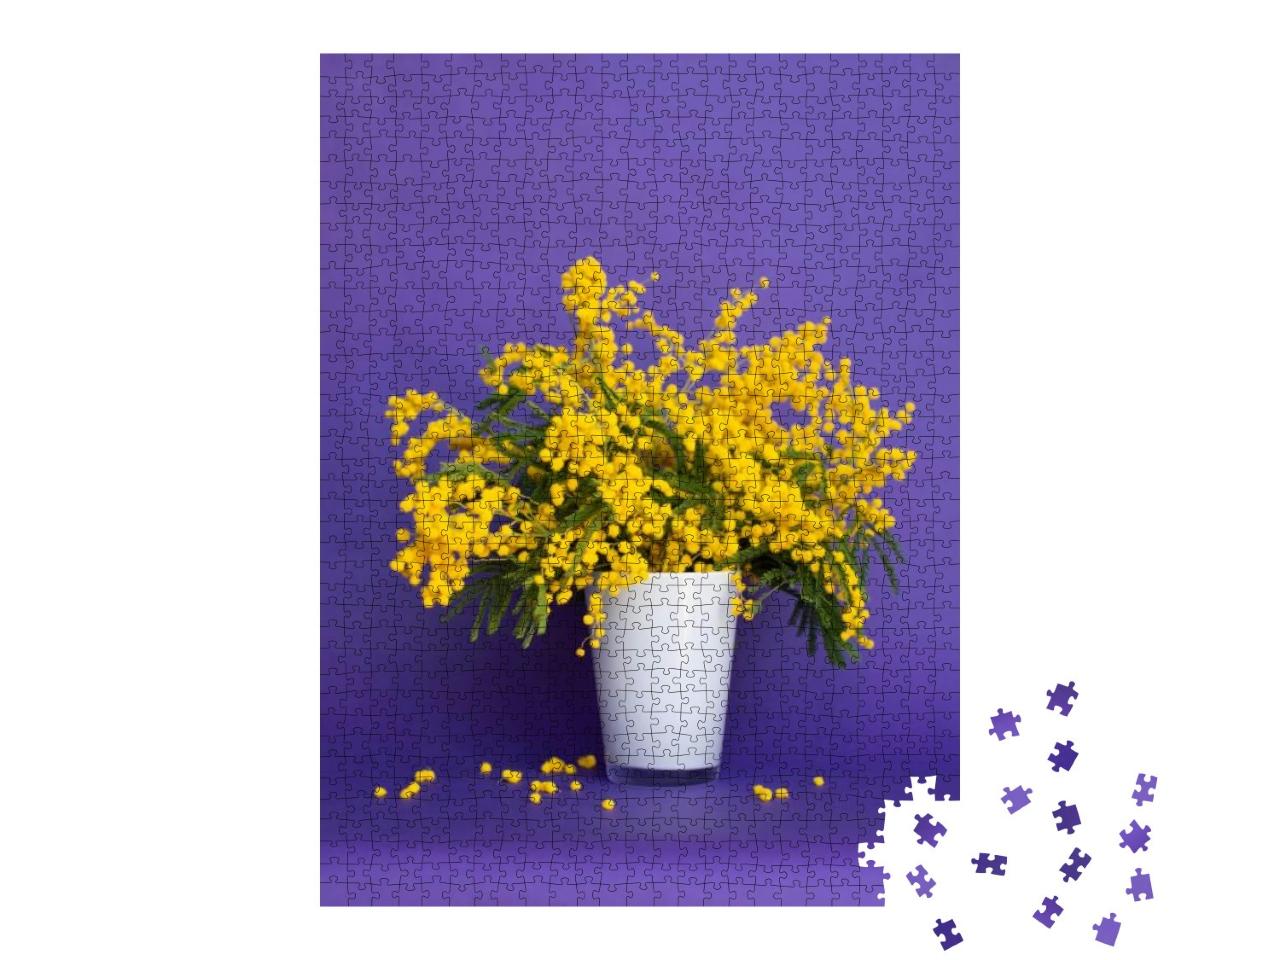 Mimosa. Yellow Flowers in a White Vase on a Purple Backgr... Jigsaw Puzzle with 1000 pieces